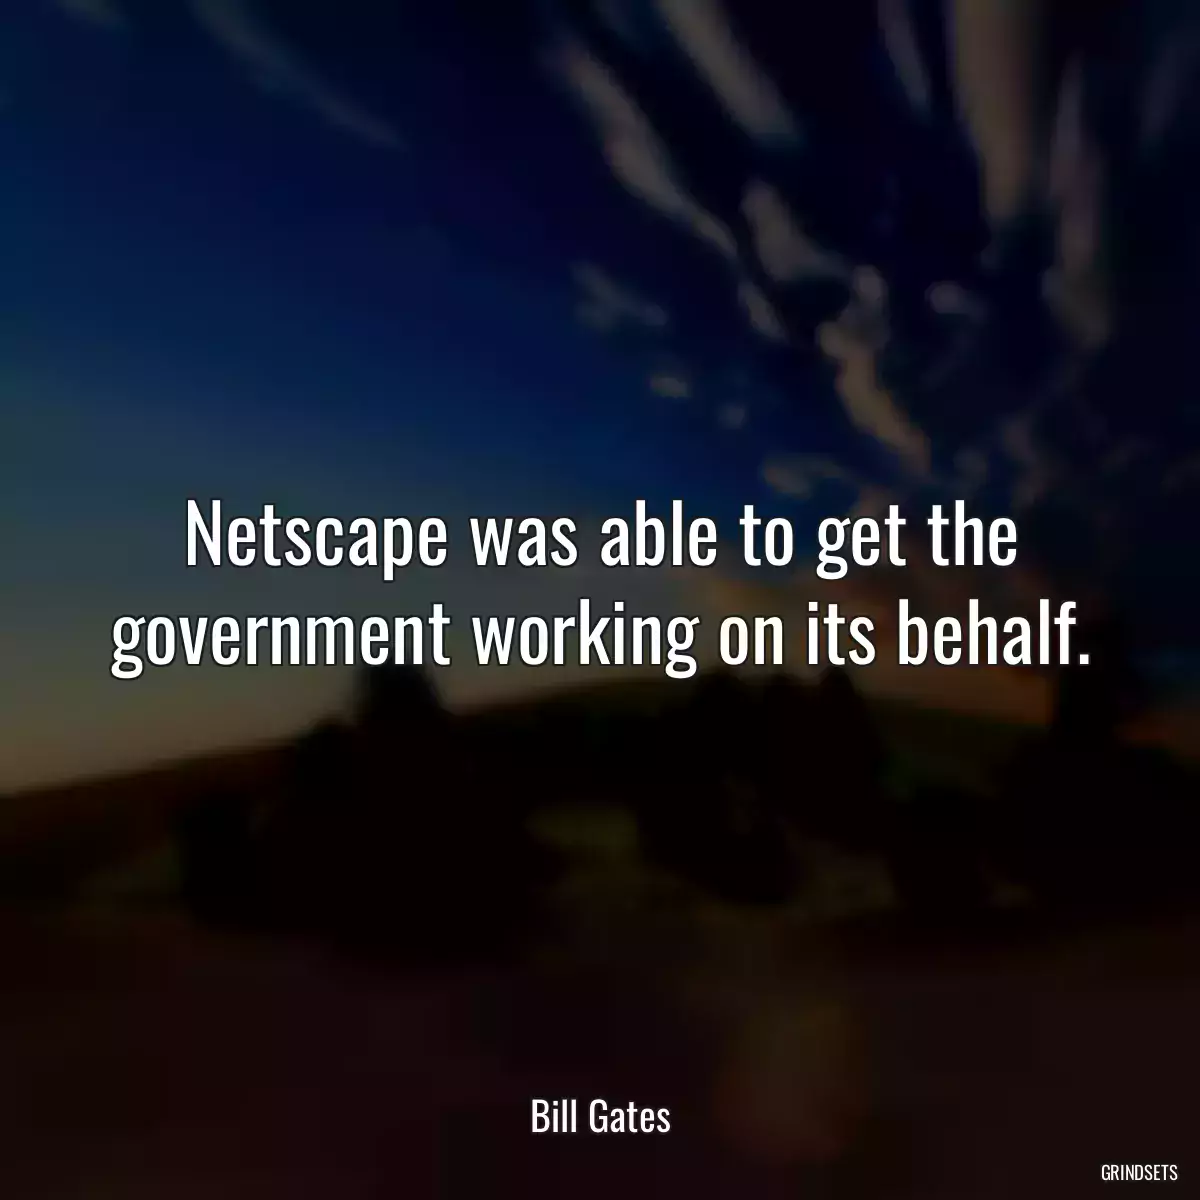 Netscape was able to get the government working on its behalf.